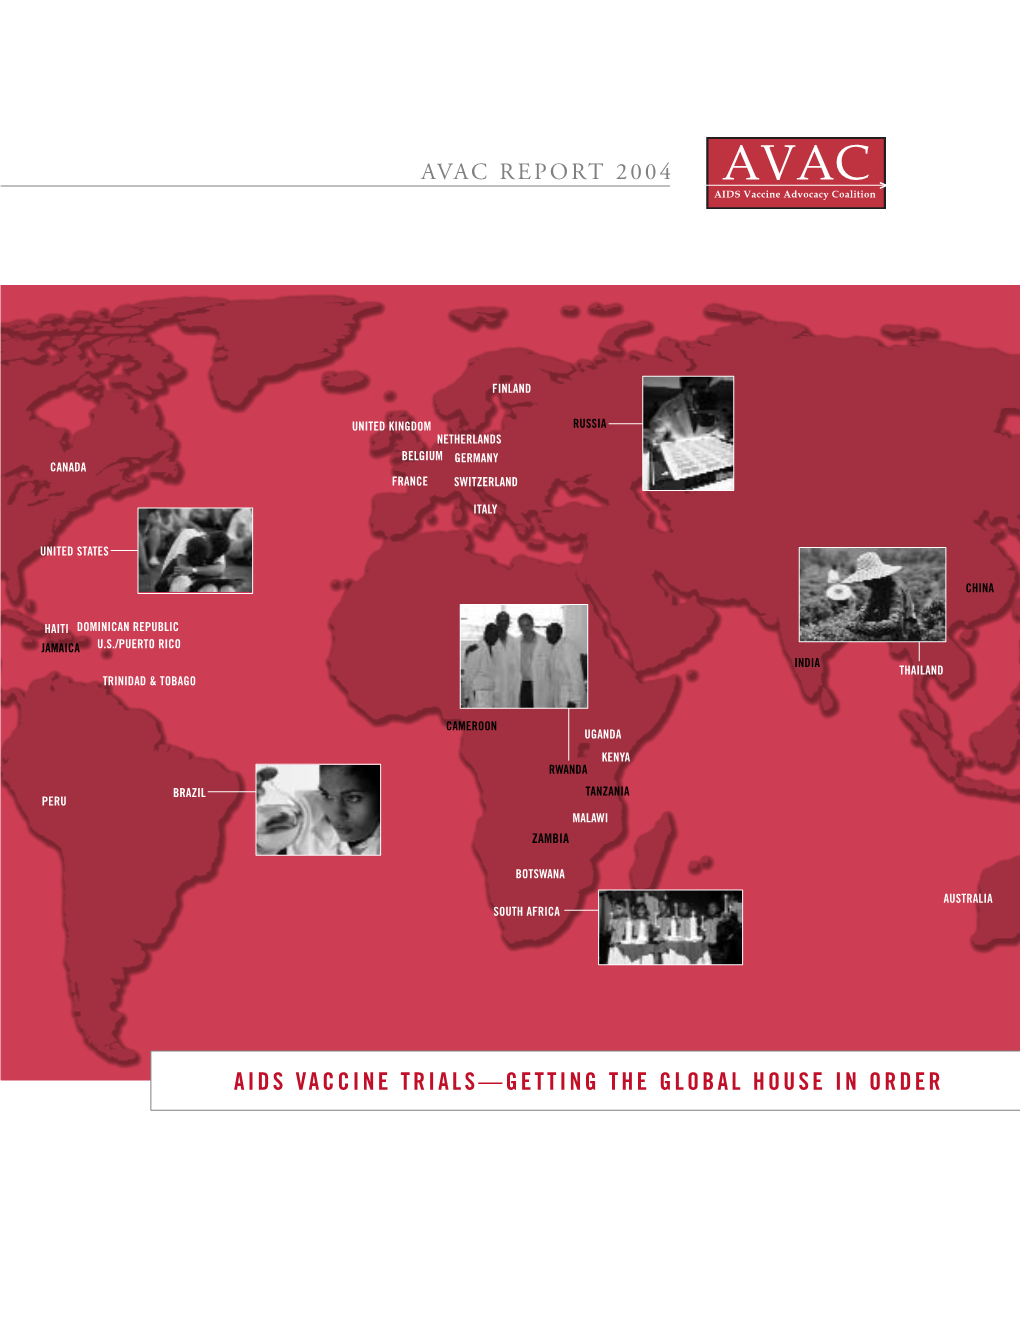 Aids Vaccine Trials—Getting the Global House in Order Acknowledgements